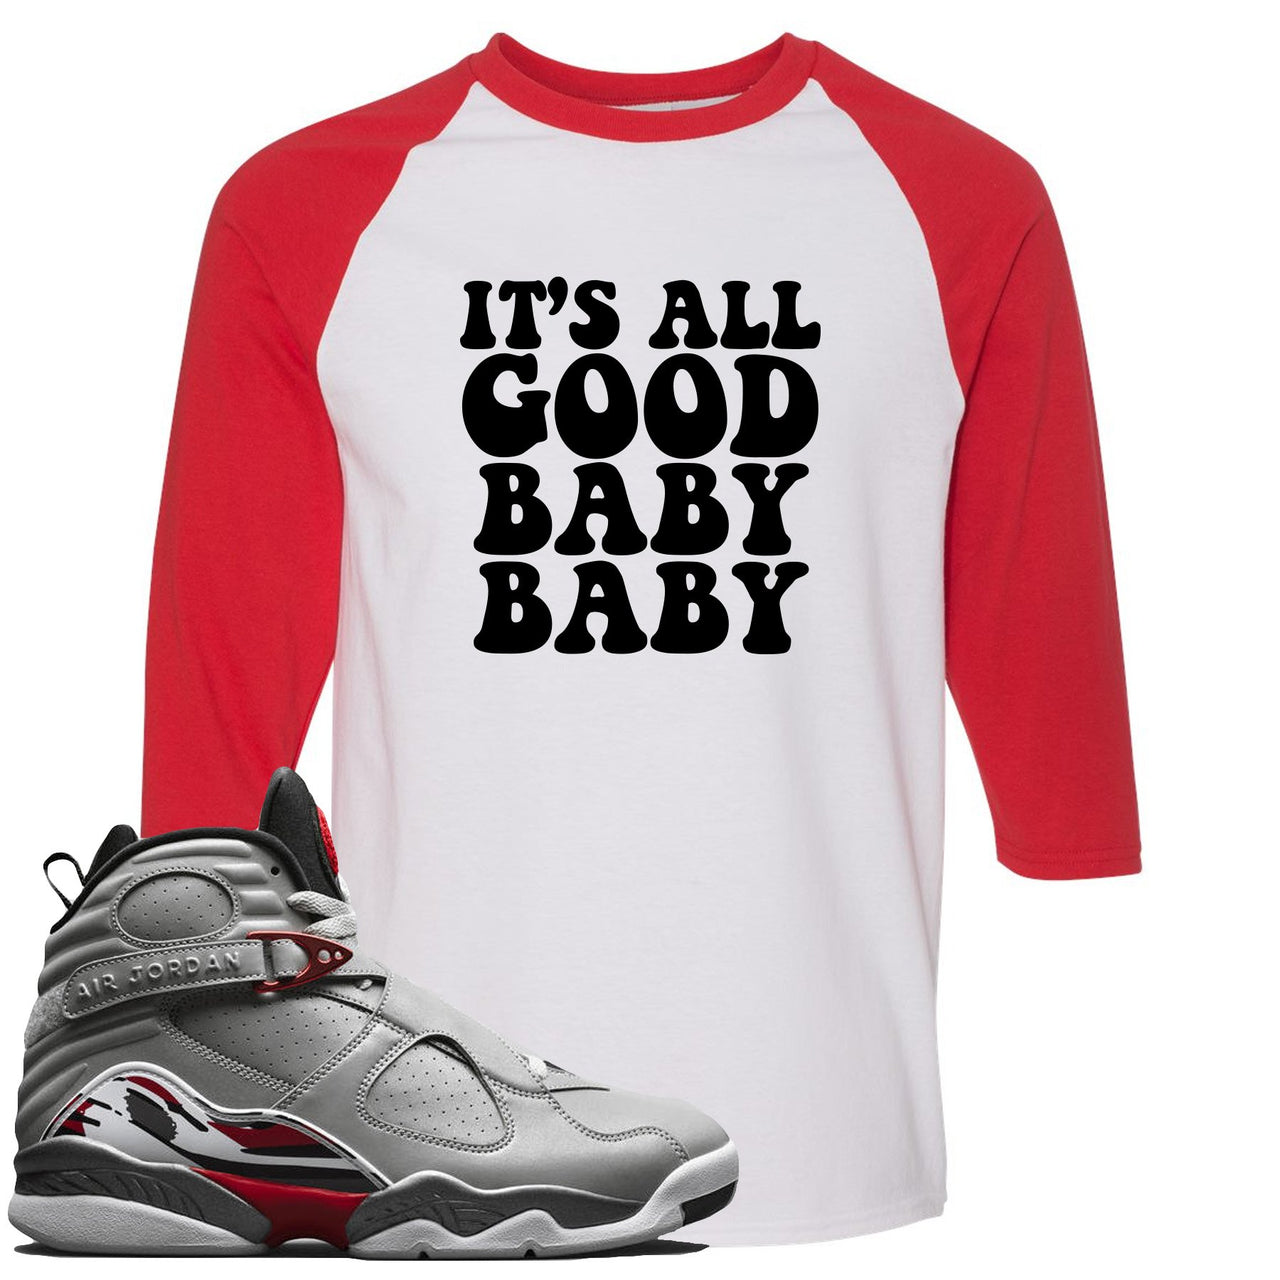 Reflections of a Champion 8s Raglan T Shirt | It's All Good Baby Baby, White and Red